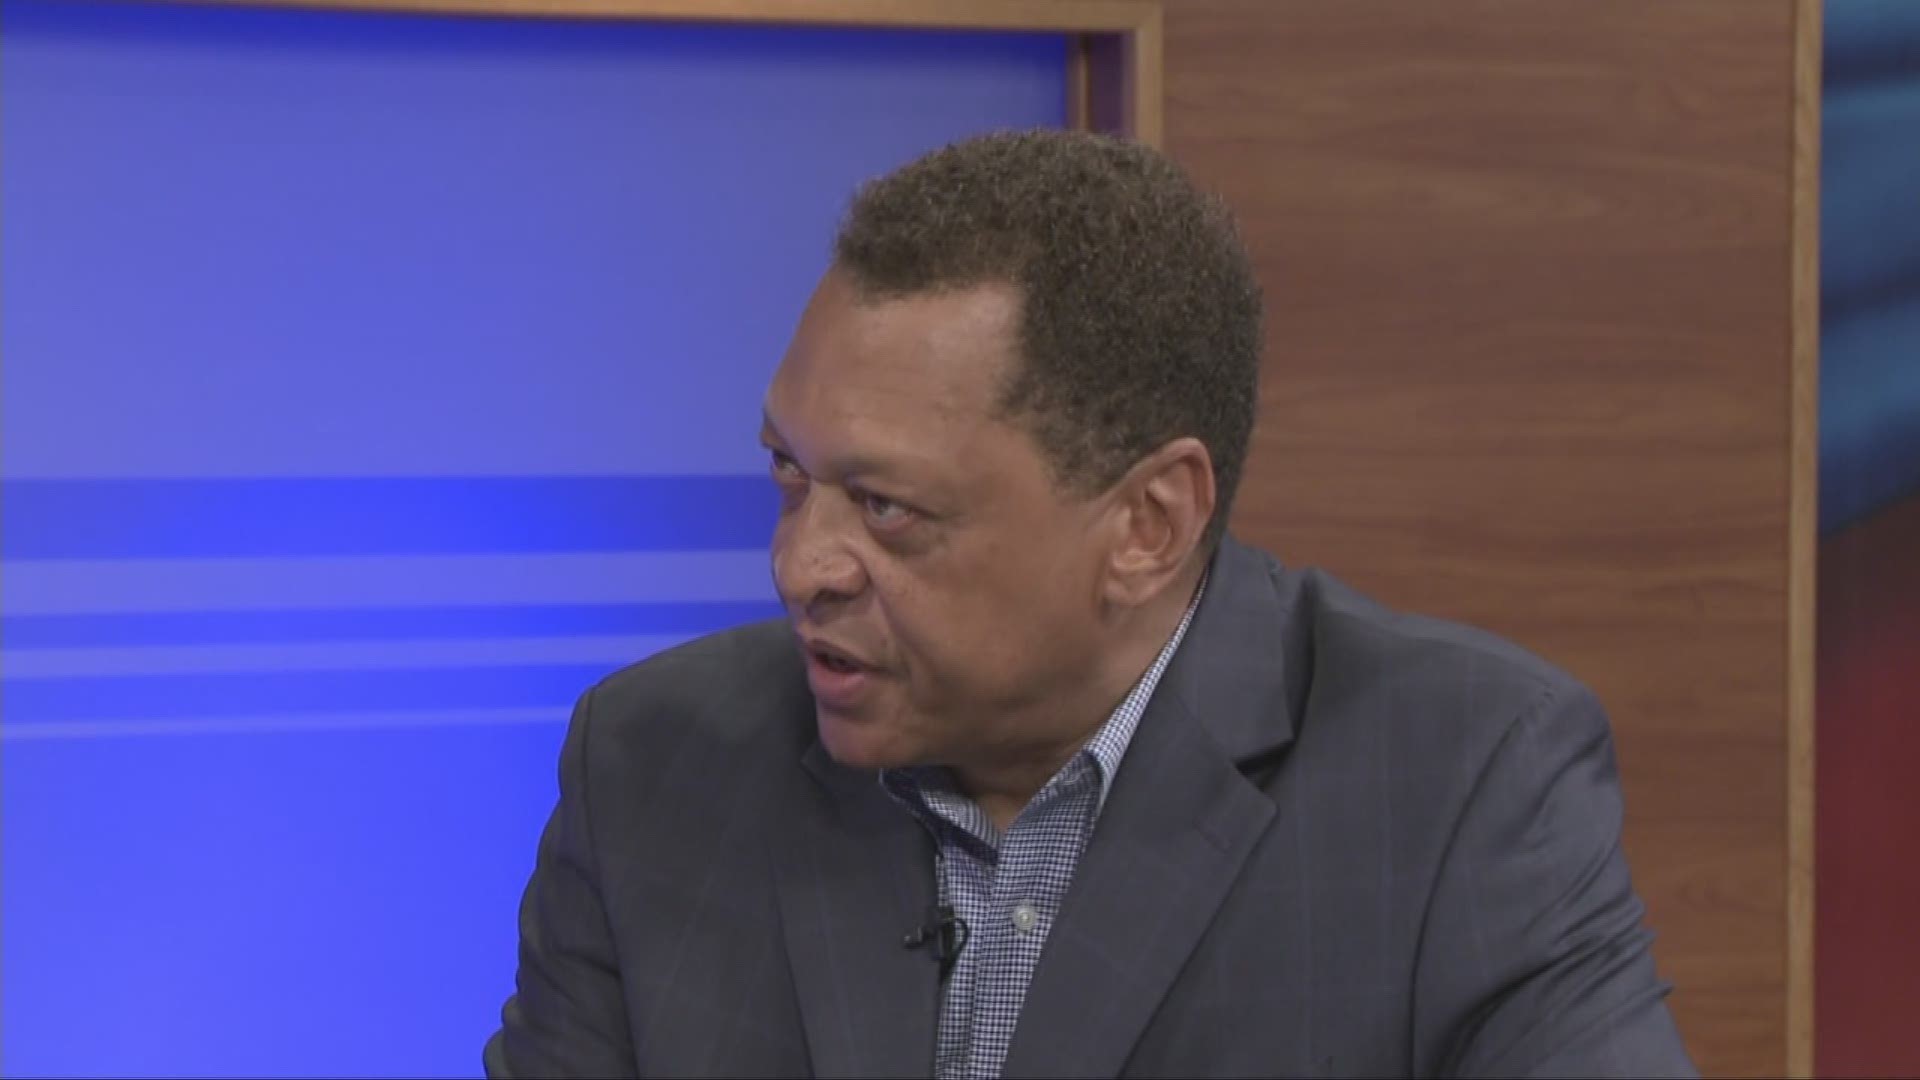 Eric Brewer sits down with Russ Mitchell to discuss mayoral candidacy